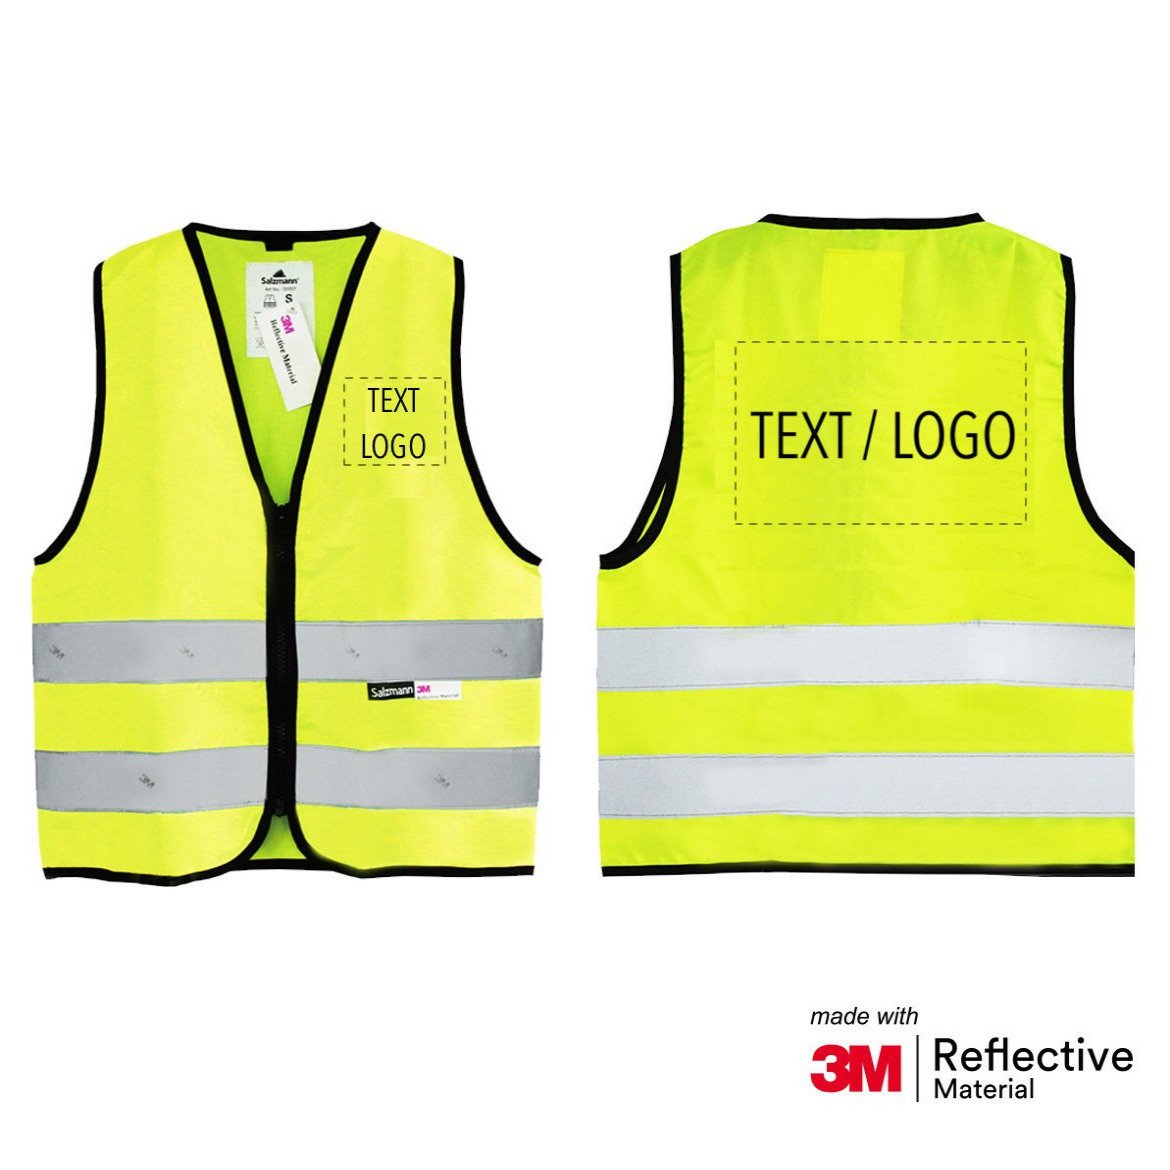 Yellow reflective safety vest for children with "Text/Logo" on the front and back